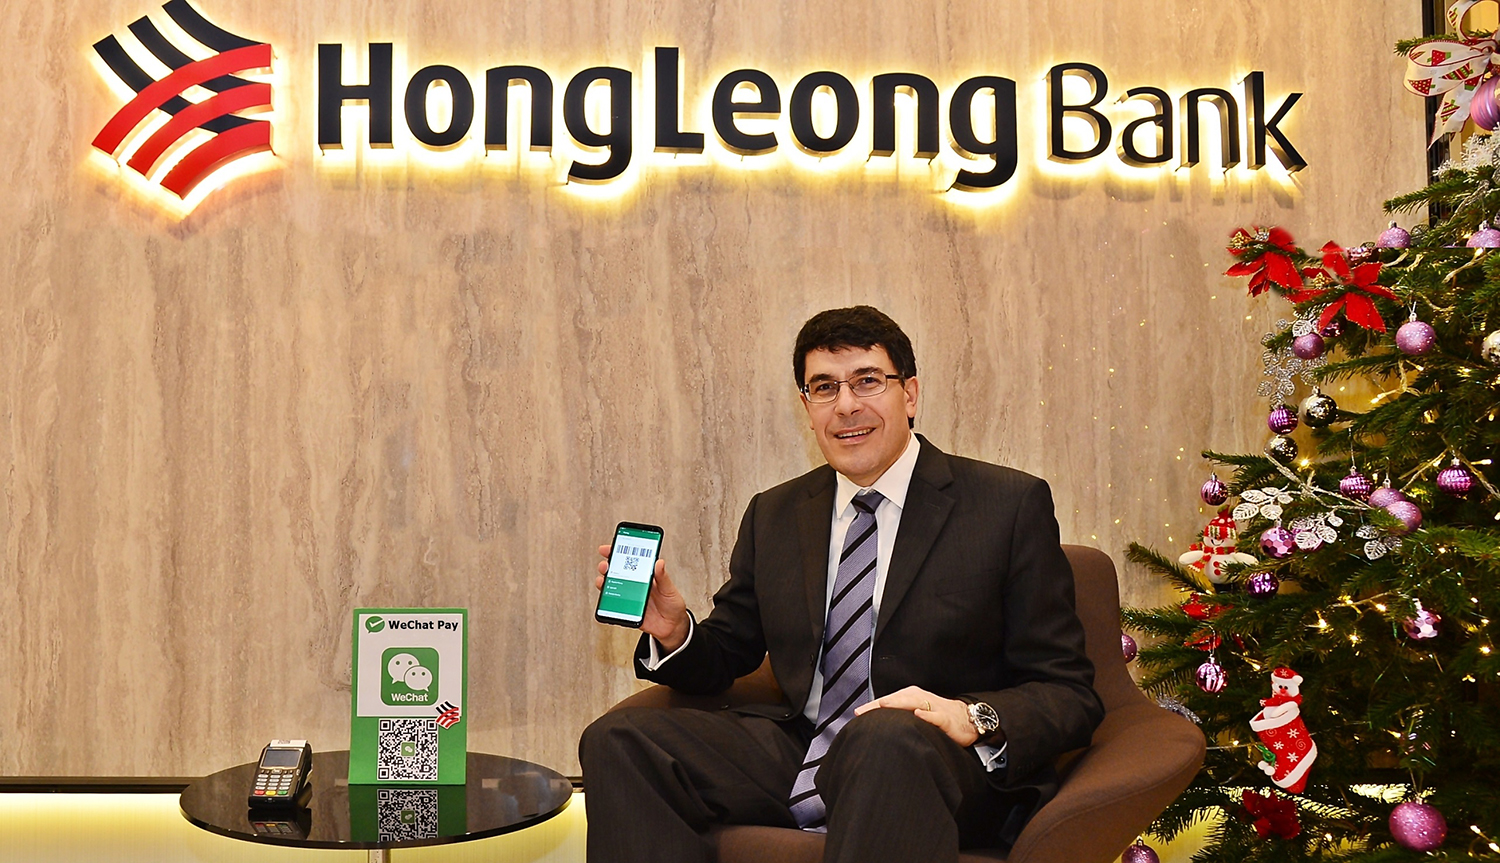 Hong Leong Bank customers can bind their debit card to WeChat Wallet